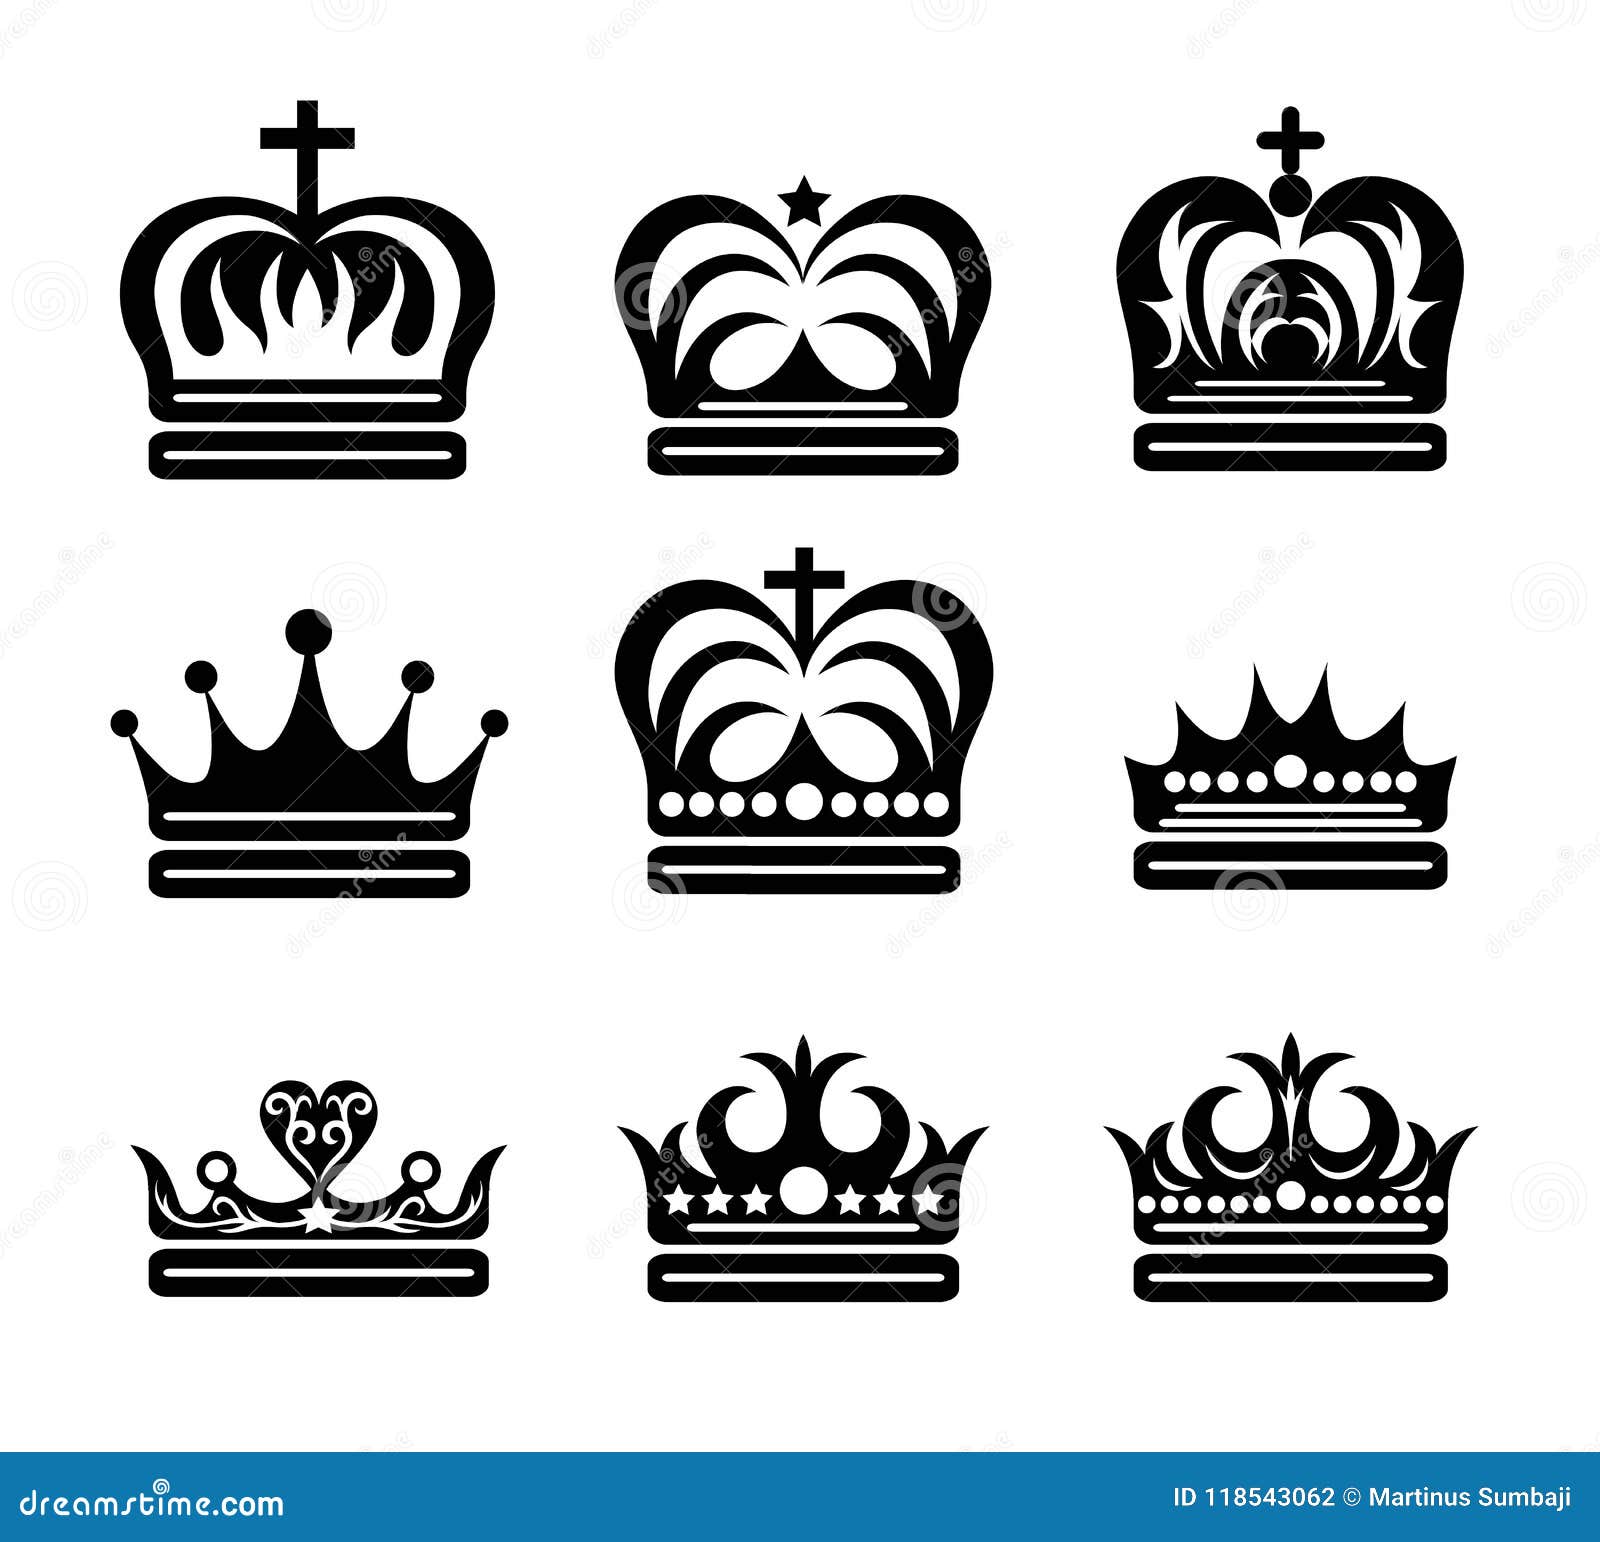 Crown King And Queen Silhouettes Art Vector Design Stock Vector